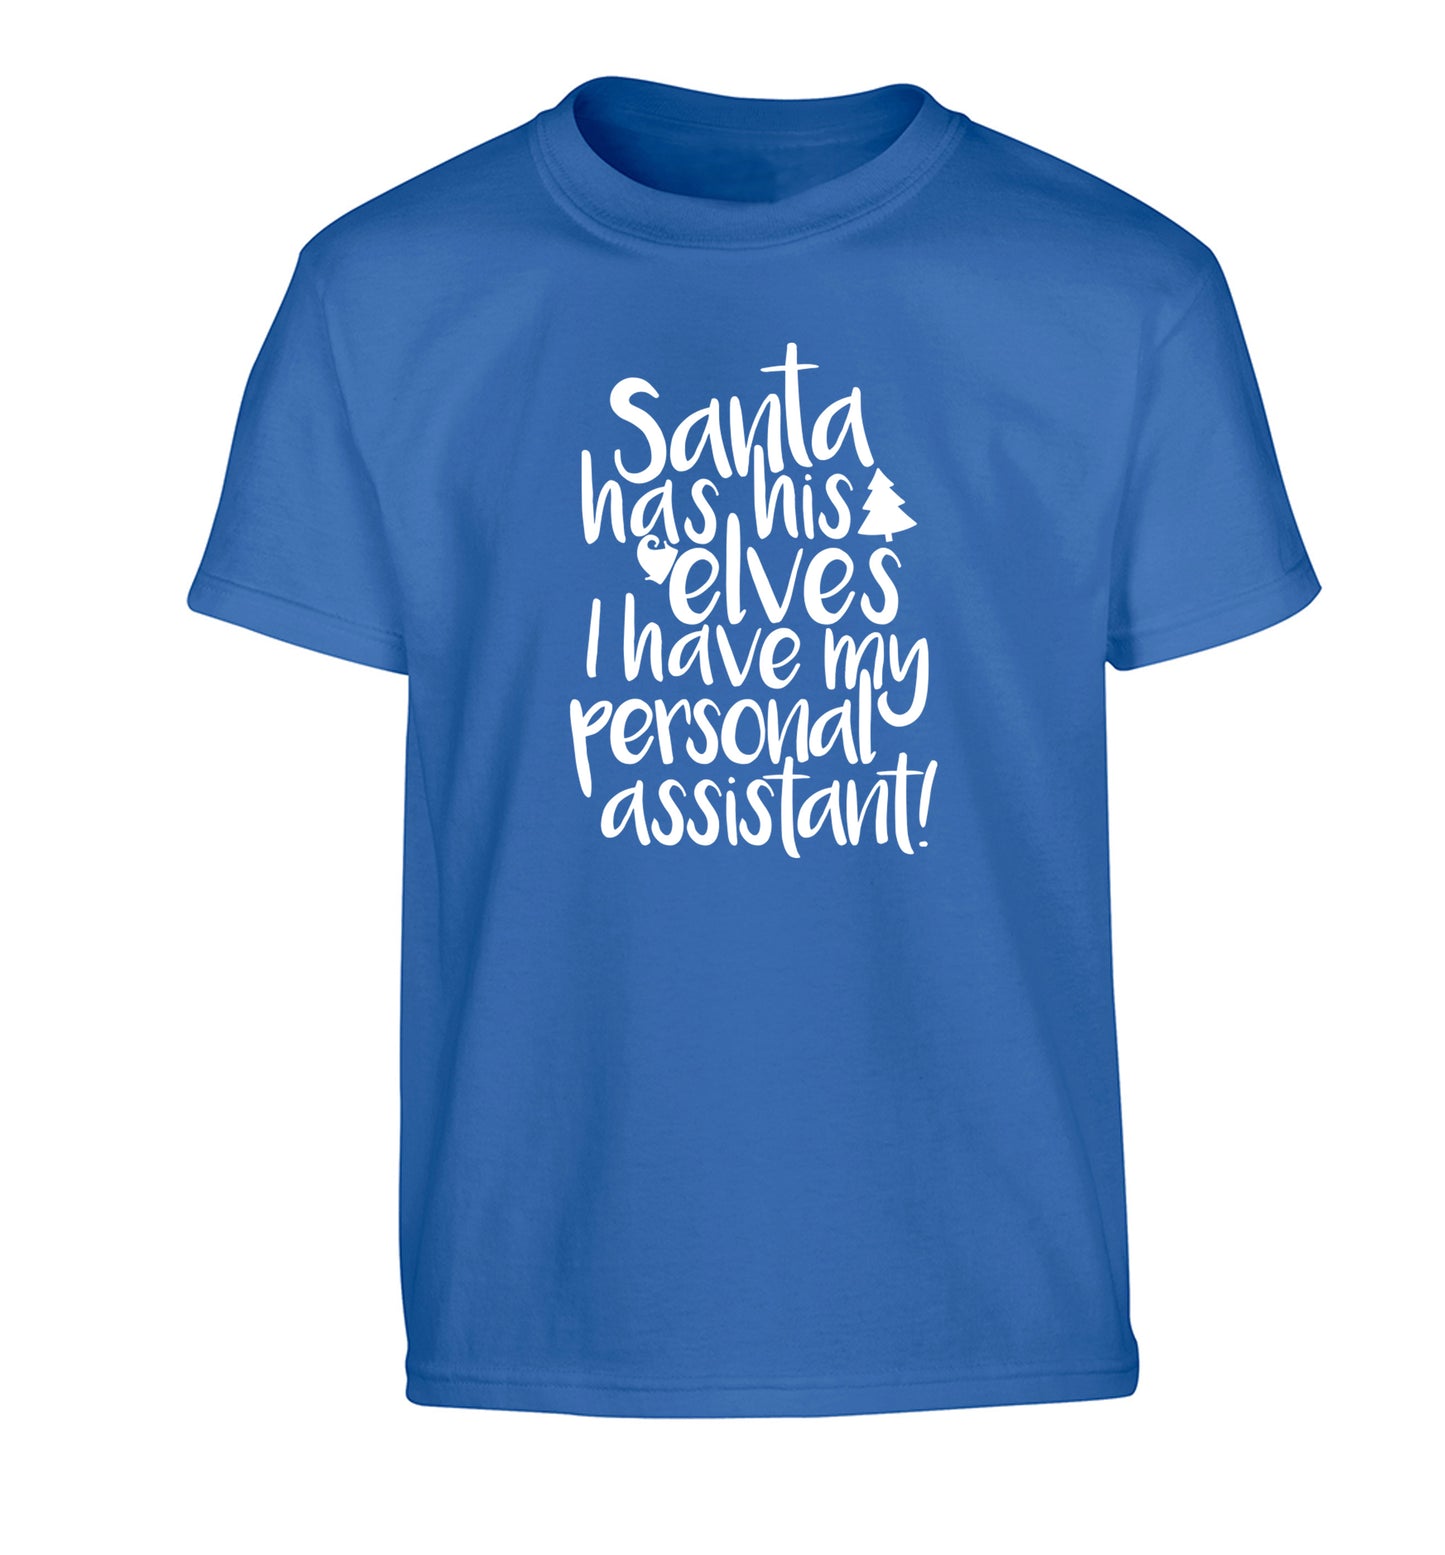 Santa has his elves I have my personal assistant Children's blue Tshirt 12-14 Years